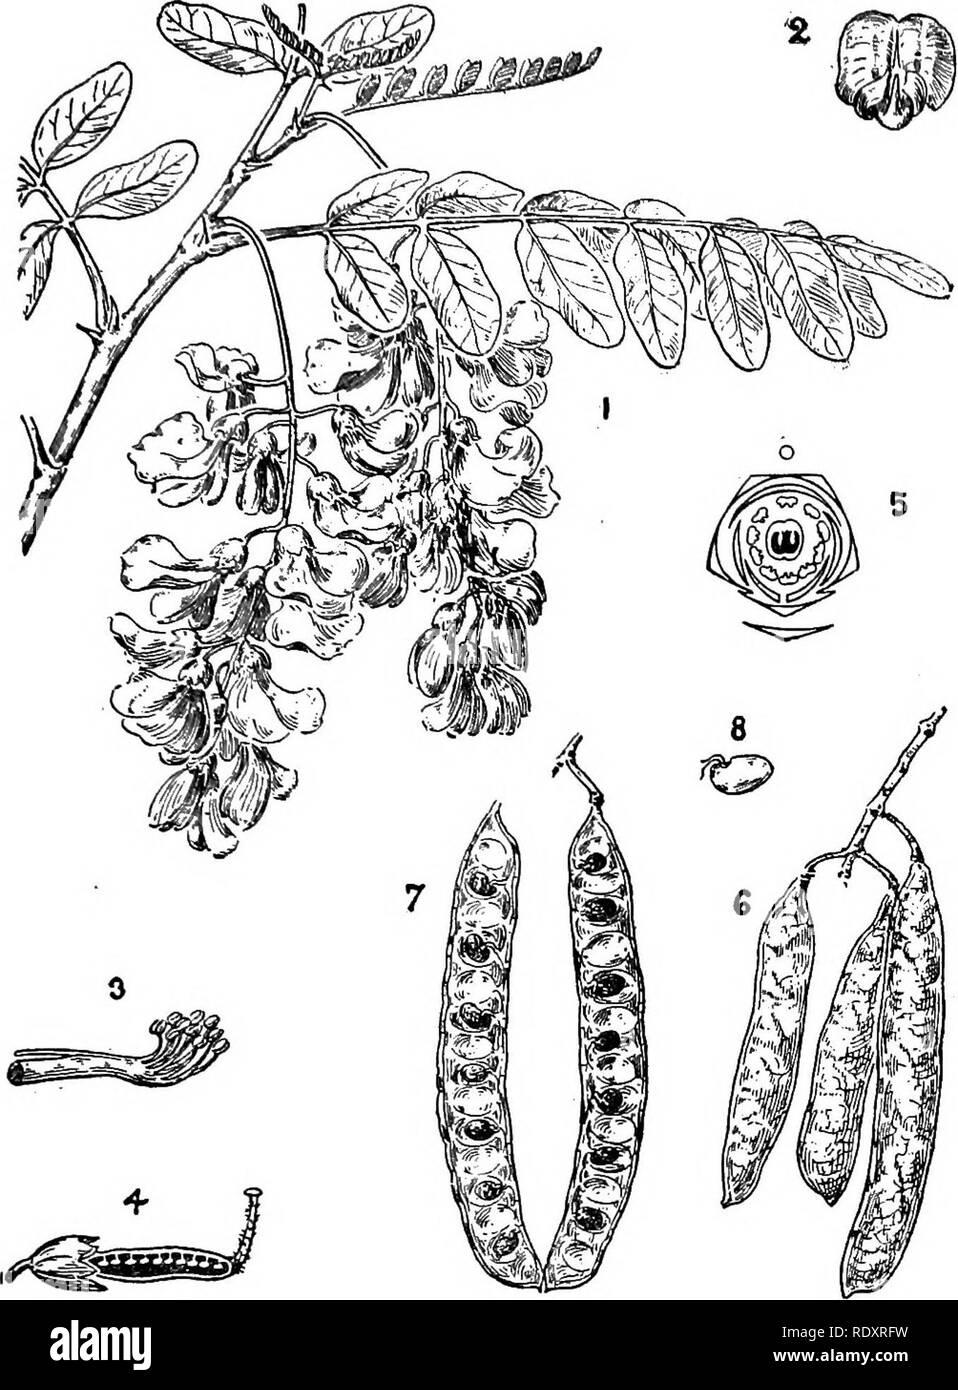 . A manual of poisonous plants, chiefly of eastern North America, with brief notes on economic and medicinal plants, and numerous illustrations. Poisonous plants. LEGUMINOSAE—ROBINIA 559. Fig. 308. Black lyocust (Robinia Pseud-acacia). 1. Flowering branch. 2. Flower. 3. Tube of stamens. 4. Longitudinal section of pistil. 5. Diagram of flower. 6. Legumes. 7. Pod open, showing seed. 8. Seed. 1, 2, 6, 7, 8, one-half natural size. (M. M. Cheney in Green's Forestry of Minnesota.) mes; calyx short, S-toothed, and slightly 2-lobed; standard large, about as long as the wings and equal; stamens diadelp Stock Photo